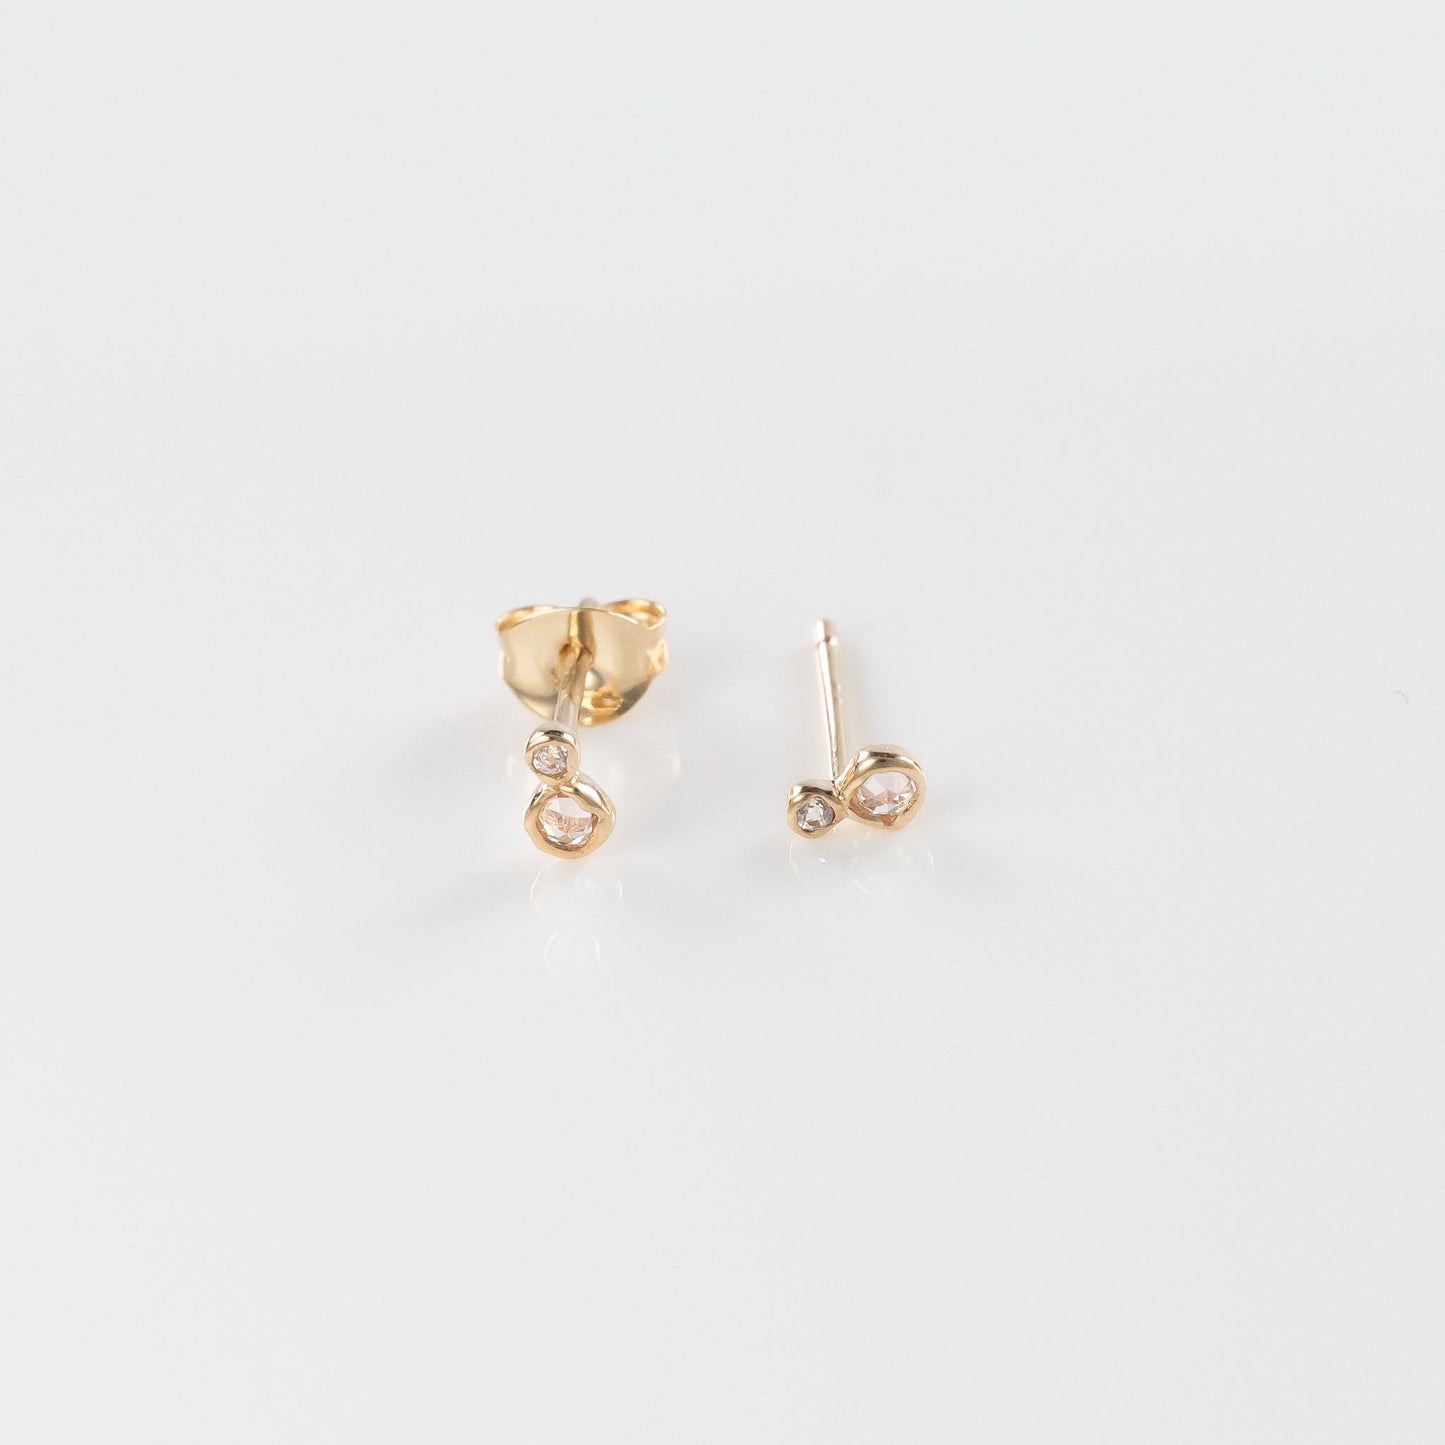 14k Yellow Gold Double Circle Studs with White Topaz and White Sapphire Accents